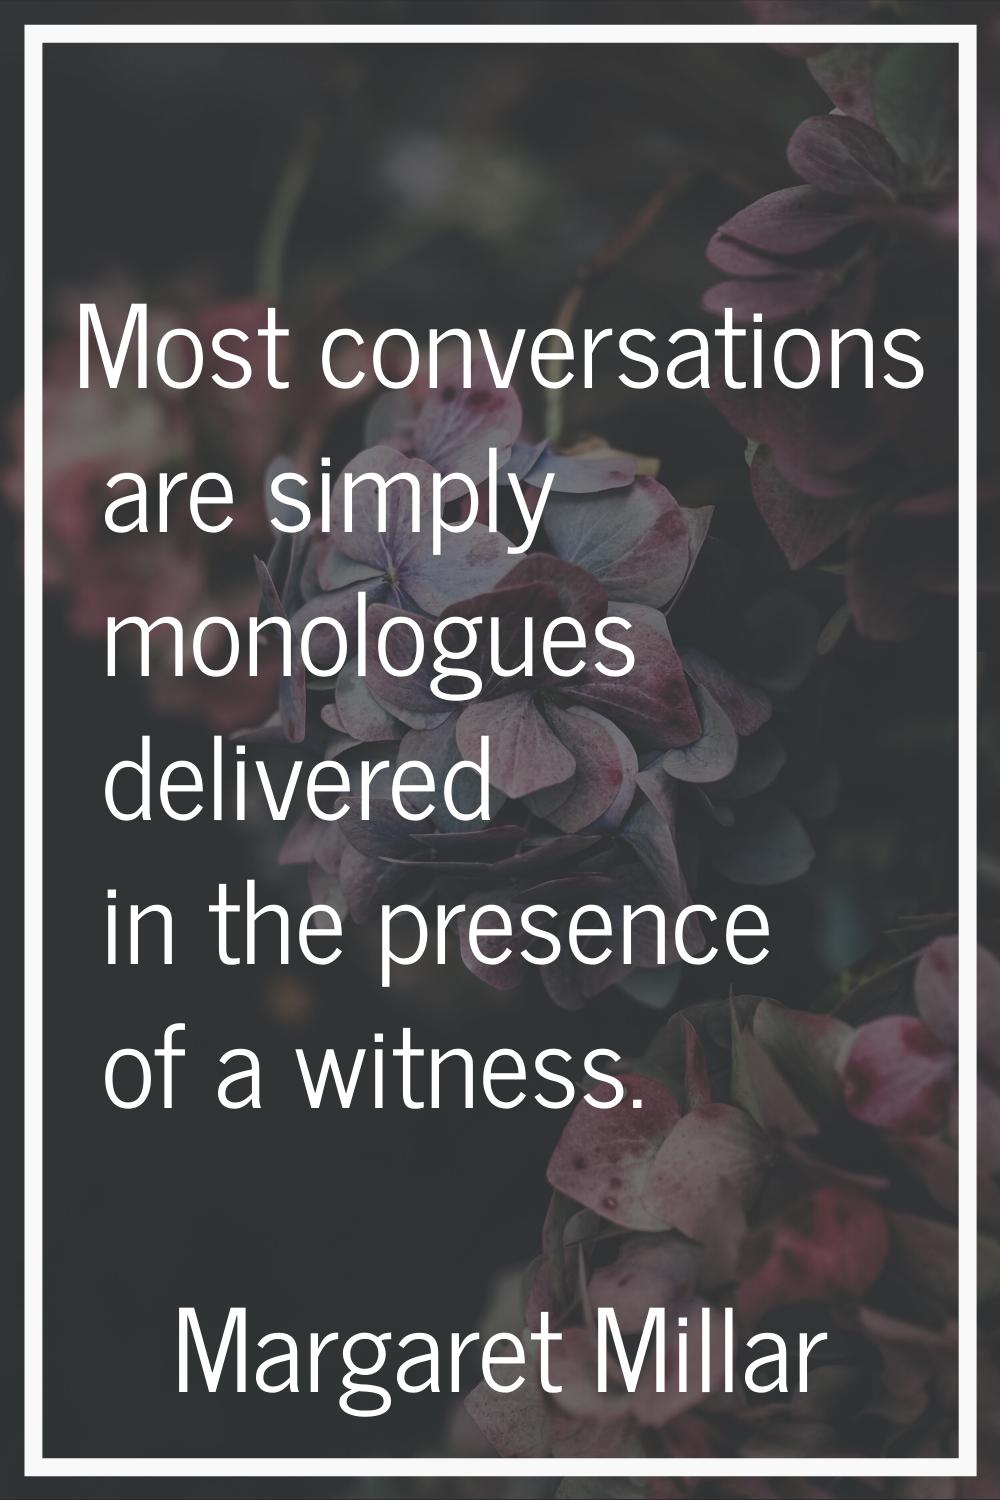 Most conversations are simply monologues delivered in the presence of a witness.